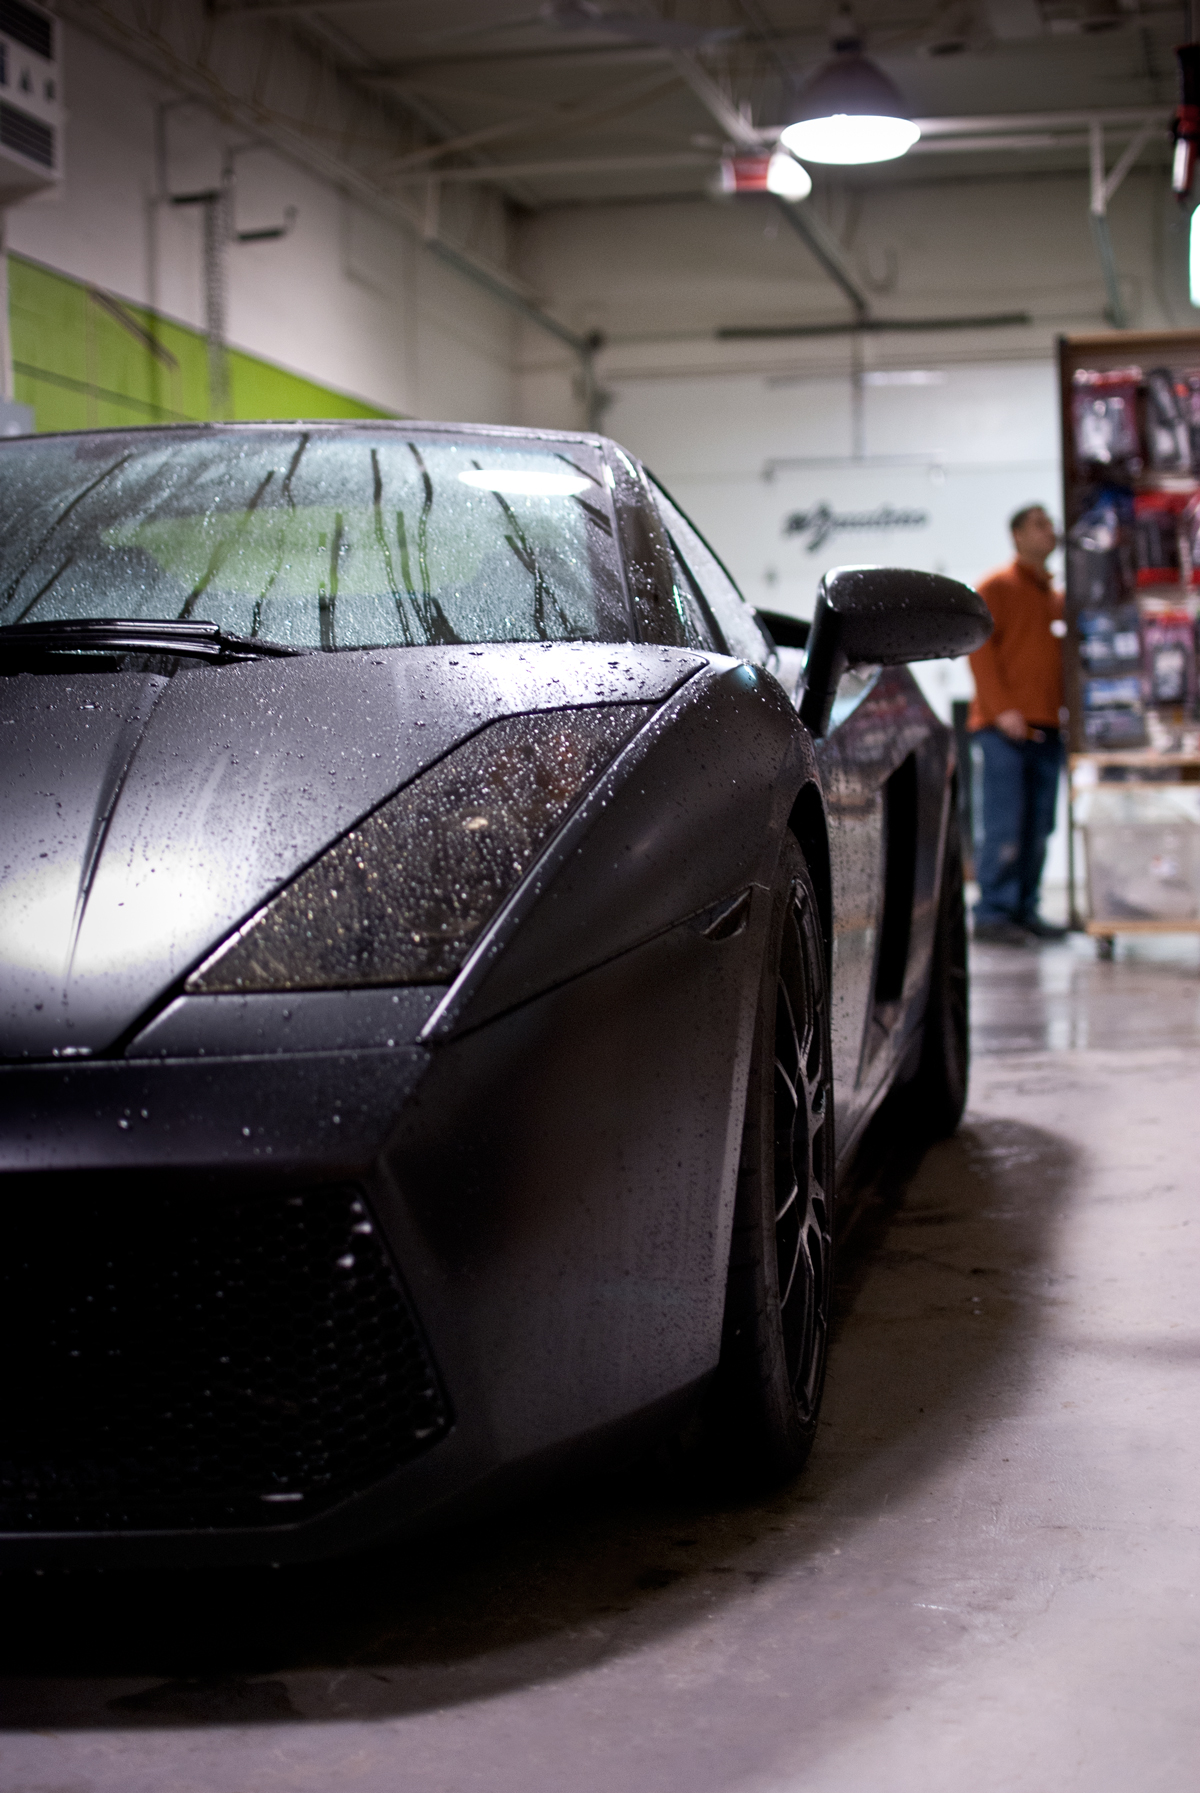 Gallardo washed to remove dirt. Its hard to keep cars clean in winter.